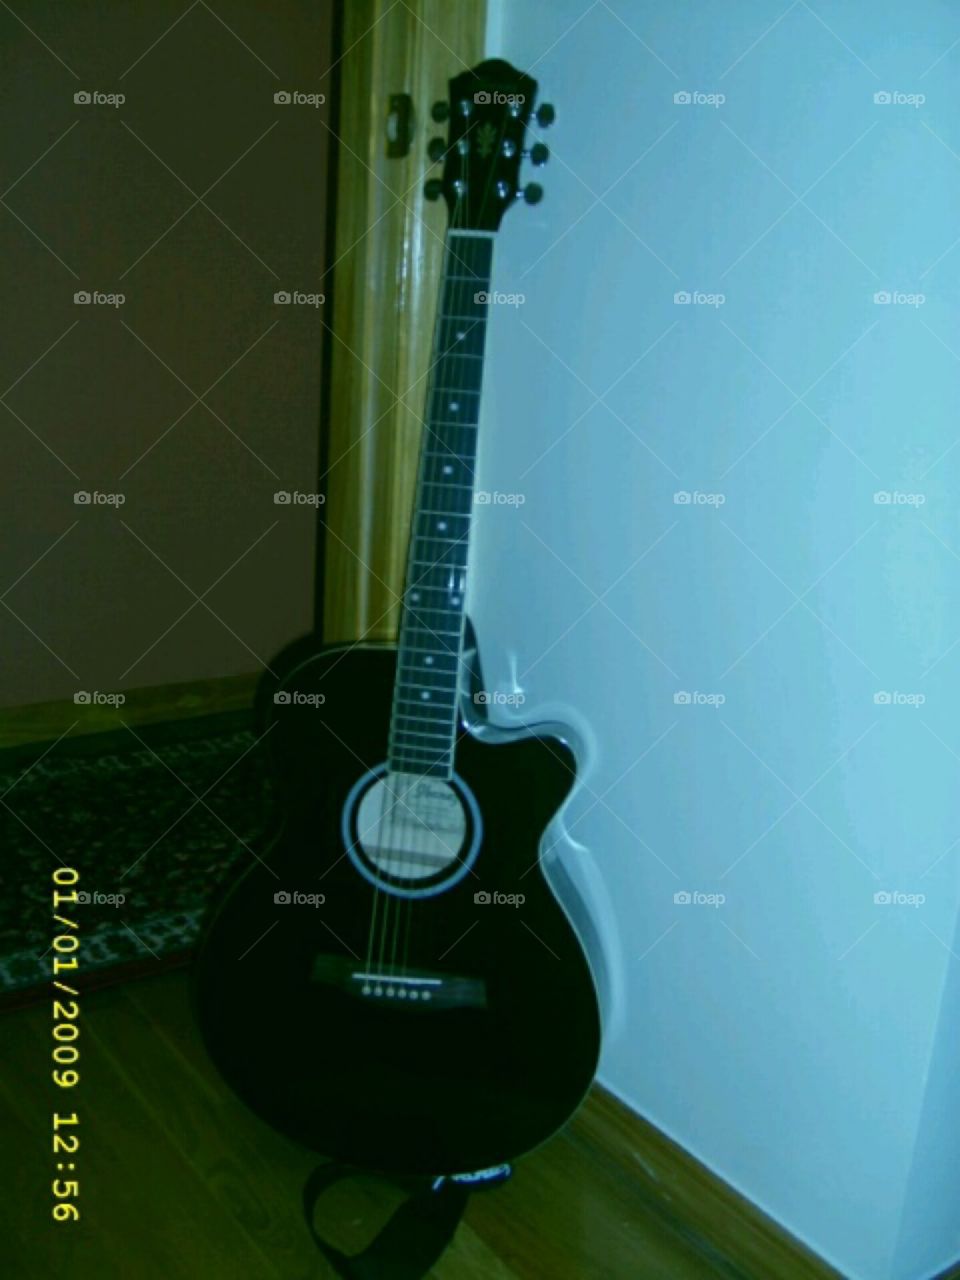 Ibanez acoustic and electric guitar 